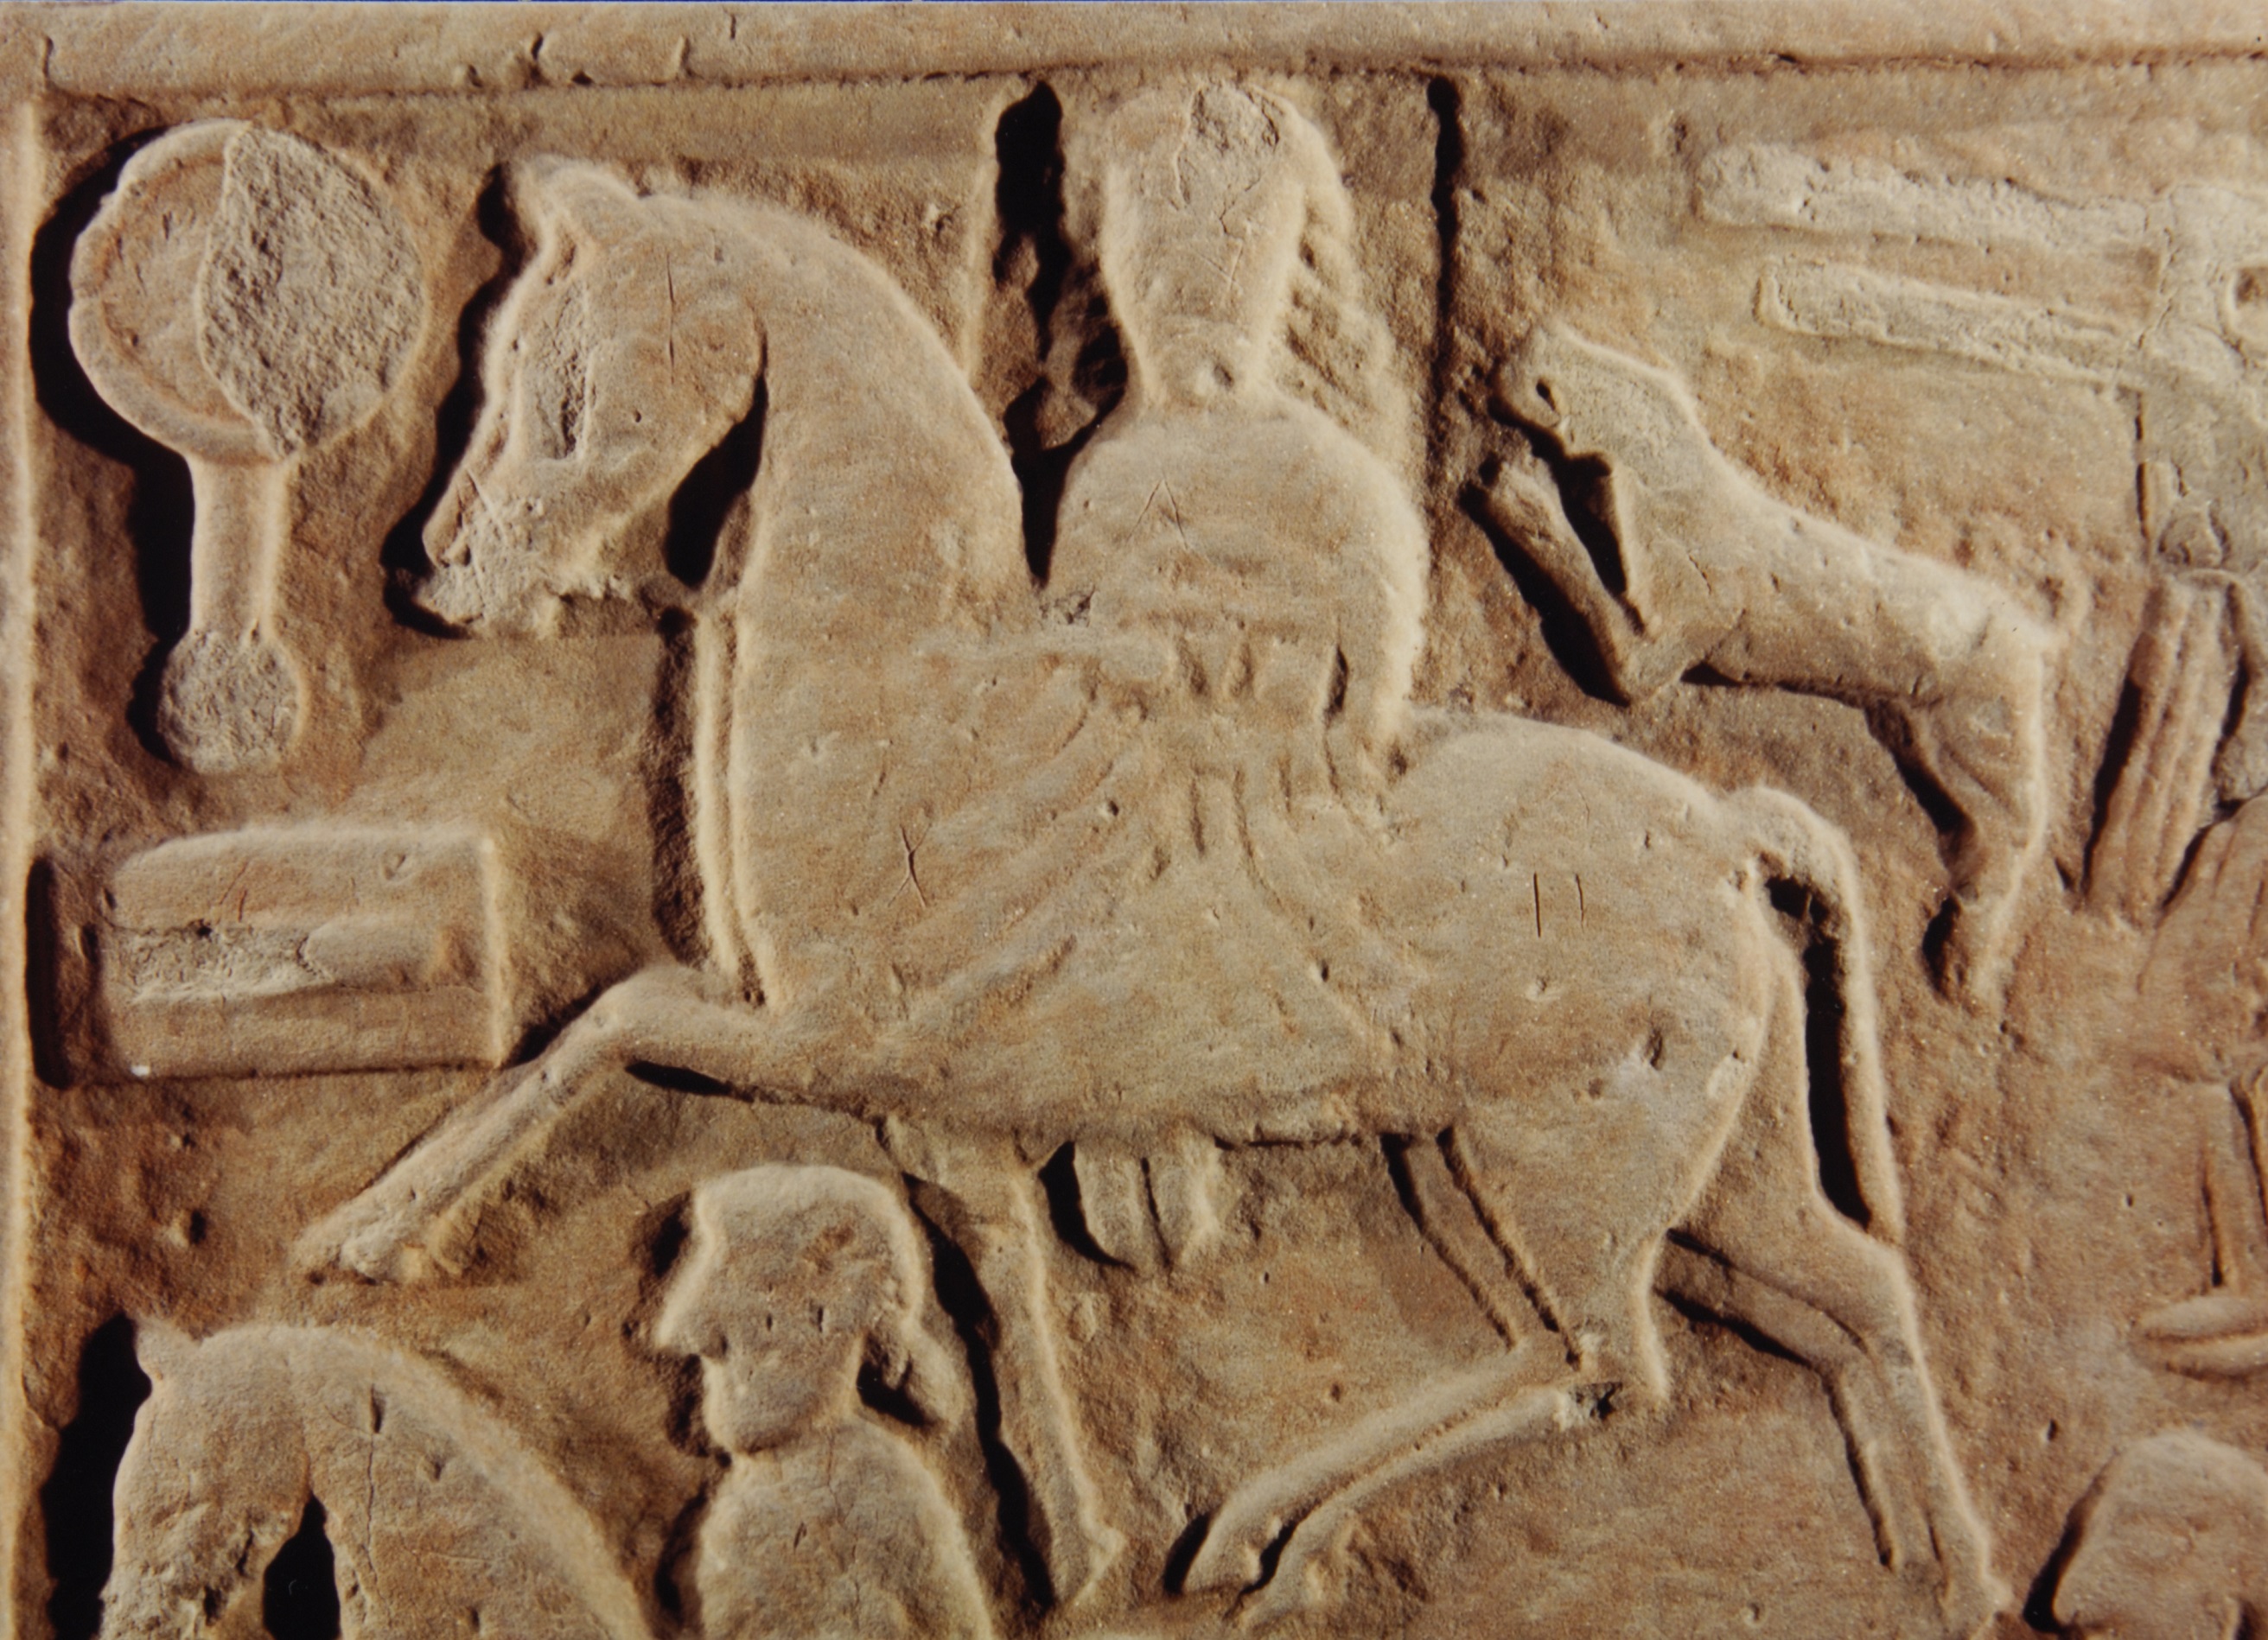 Detail of the Hilton of Cadboll Pictish Stone, showing woman on horseback.